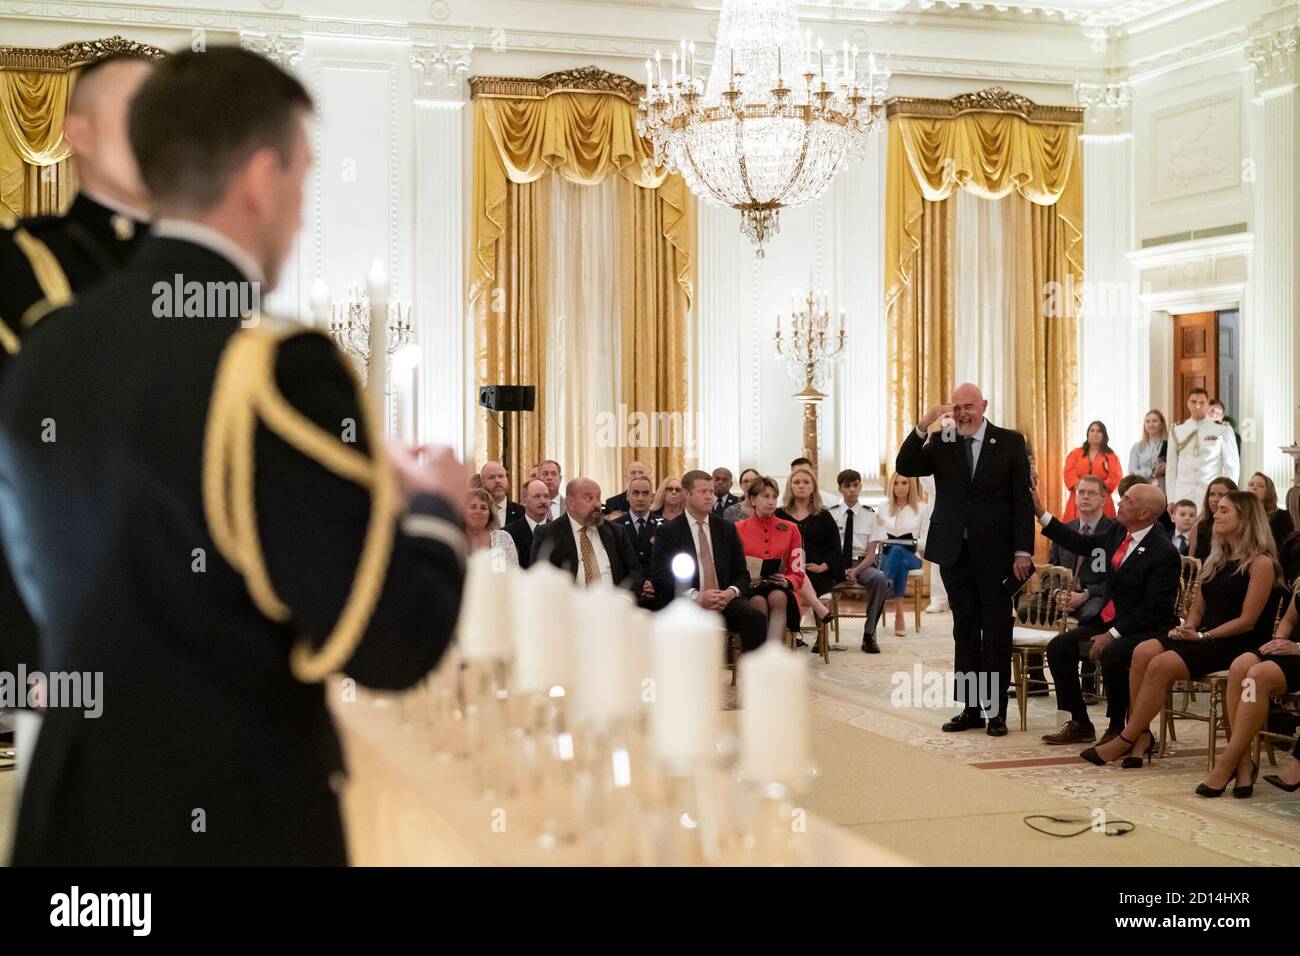 White House Reception to Honor Gold Star Families. A Gold Star family  member stands  and salutes as the name of their loved one is read aloud and a remembrance candle lit at a reception to honor Gold Star Families Sunday, Sept. 27, 2020, in the East Room of the White House. Stock Photo